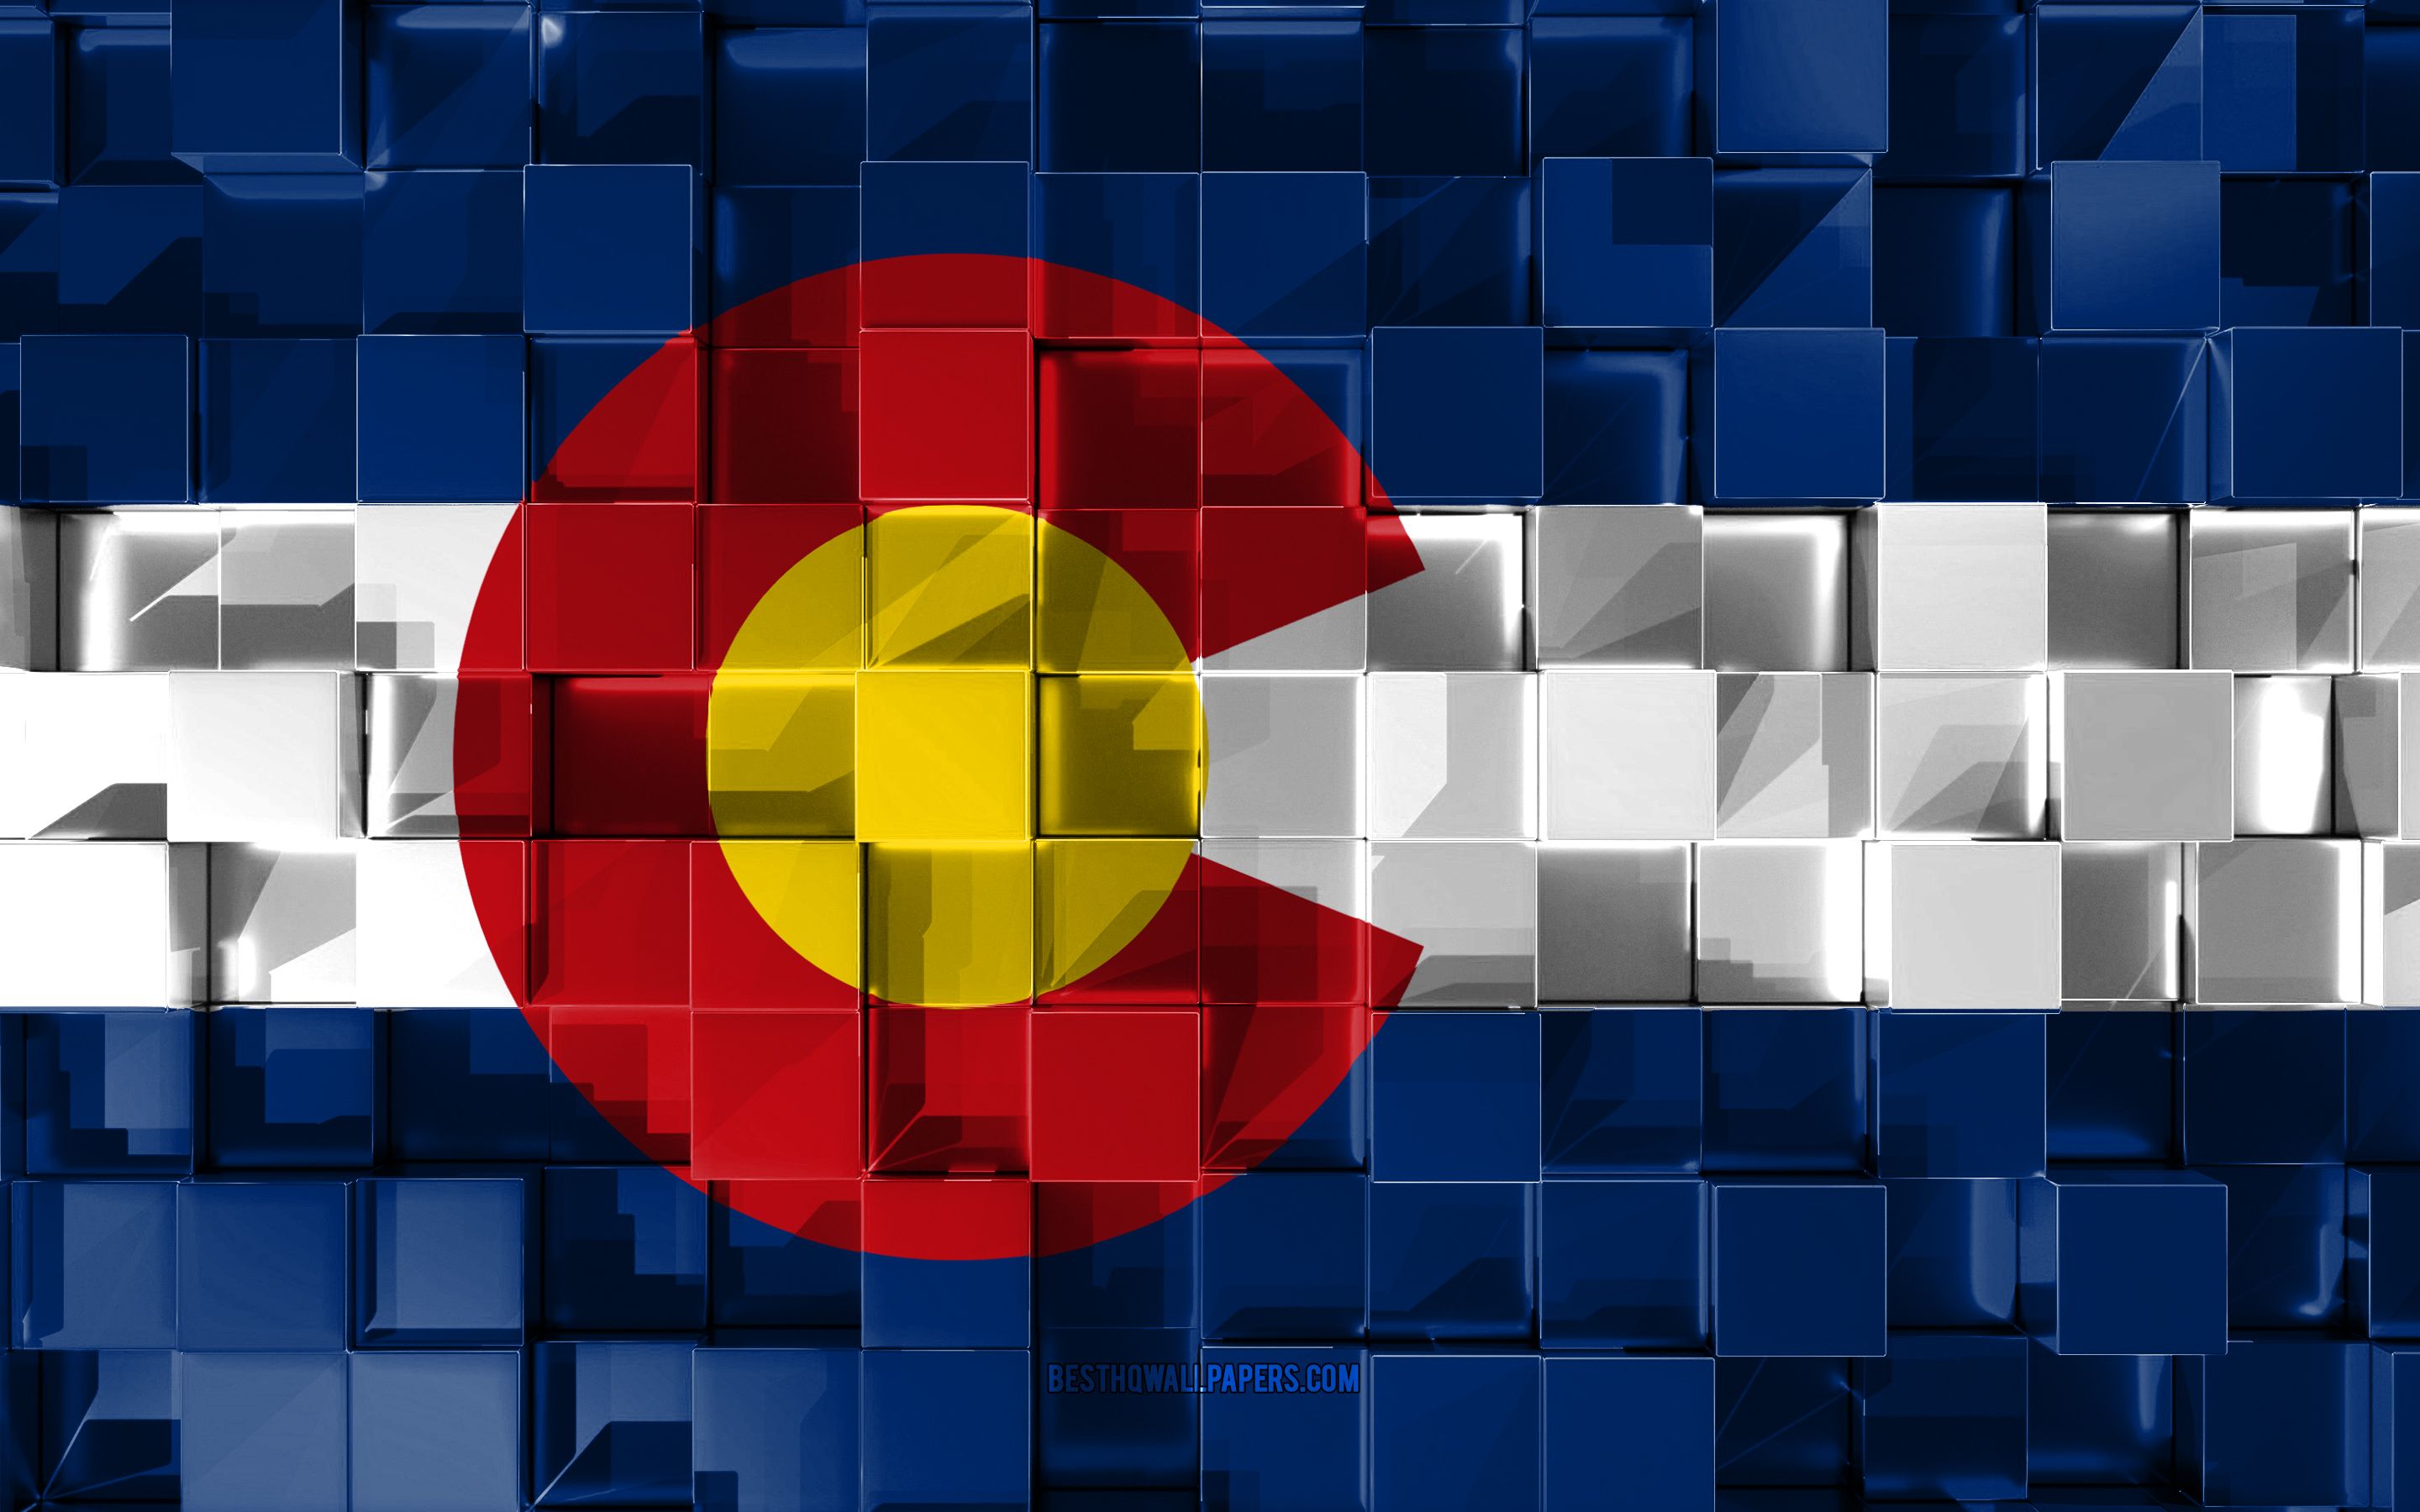 Download wallpaper Flag of Colorado, 3D flag, US state, 3D cubes texture, Flags of American states, 3D art, Colorado, USA, 3D texture, Colorado flag for desktop with resolution 2880x1800. High Quality HD